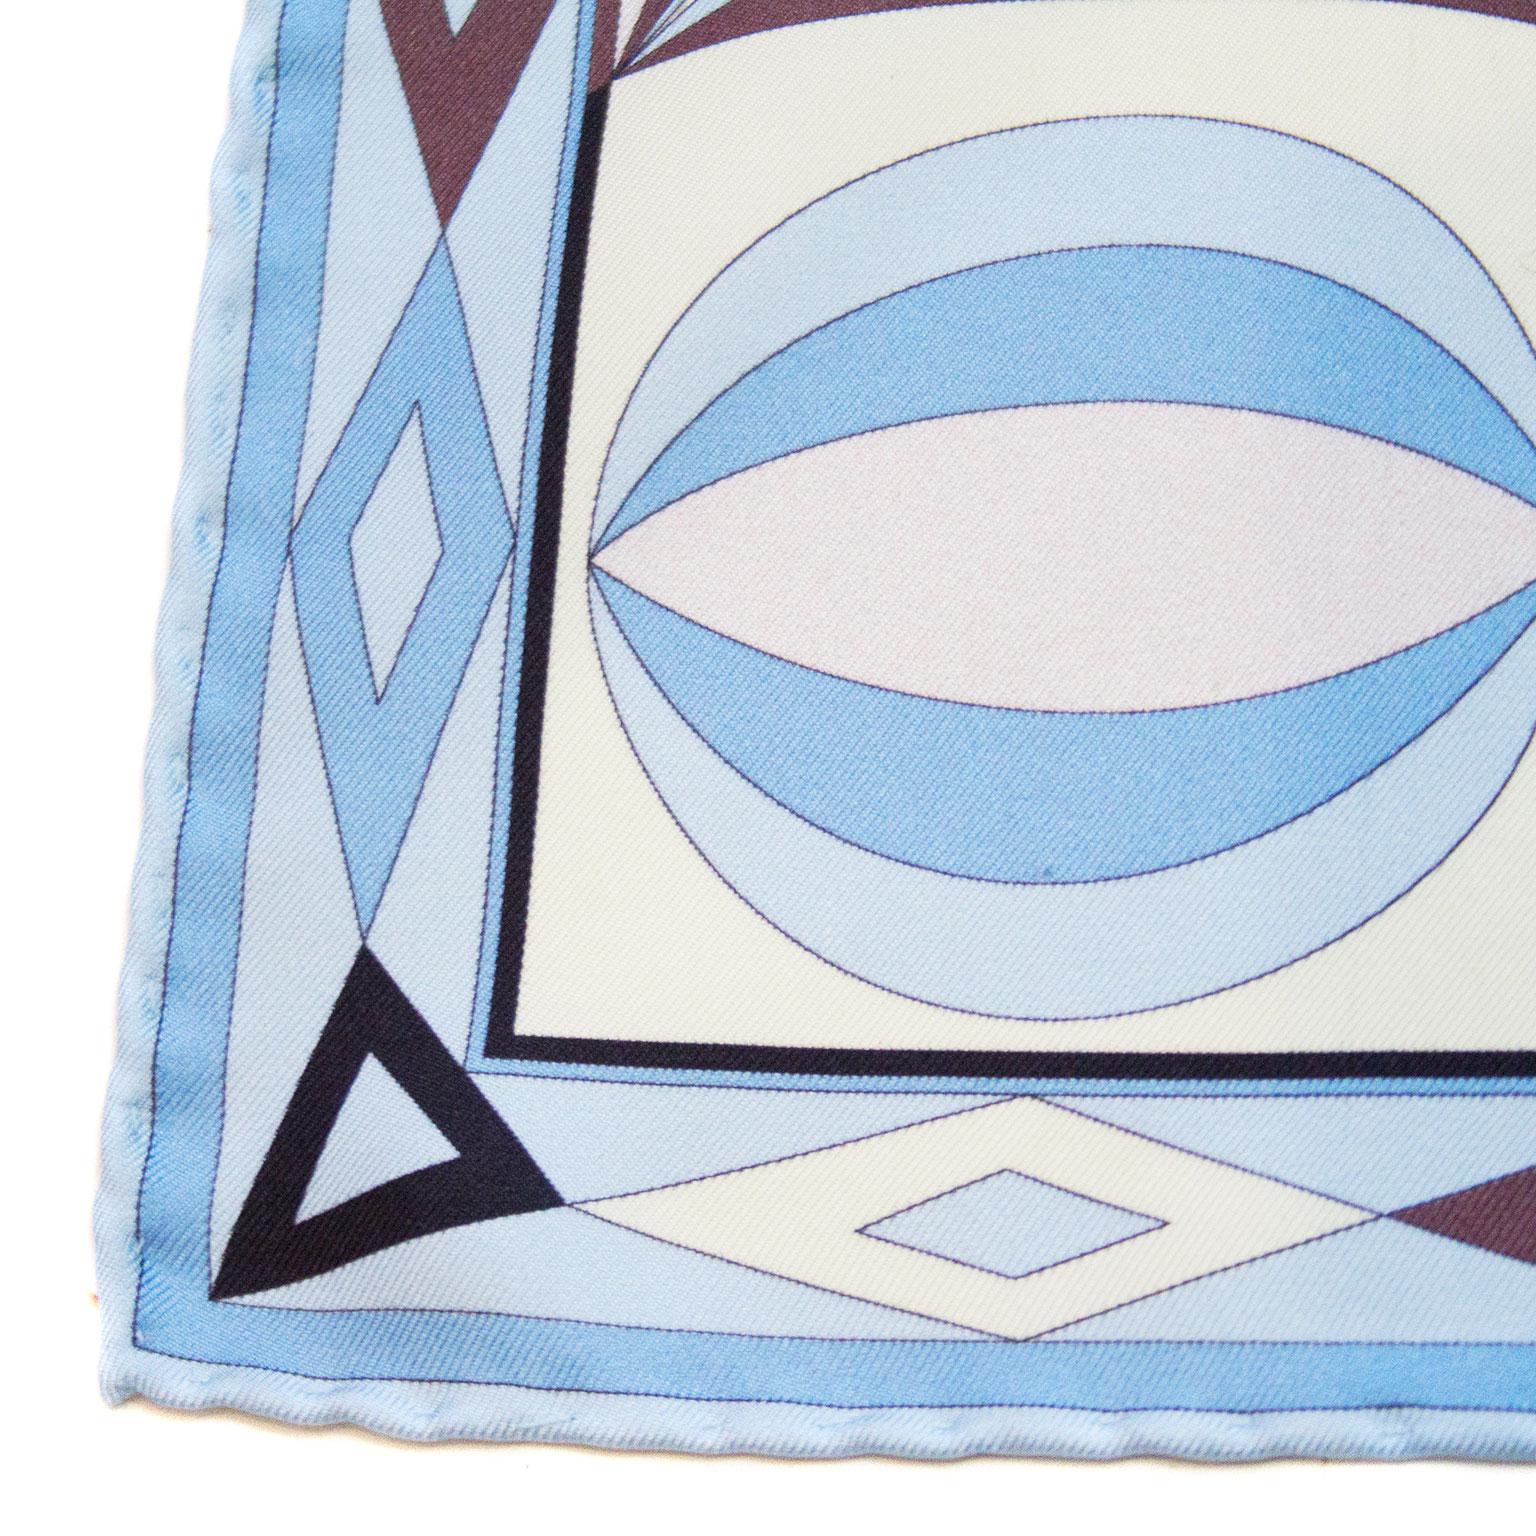 Early 2000s Pucci Blue and Brown Printed Silk Mini Scarf im Zustand „Neu“ in Toronto, Ontario